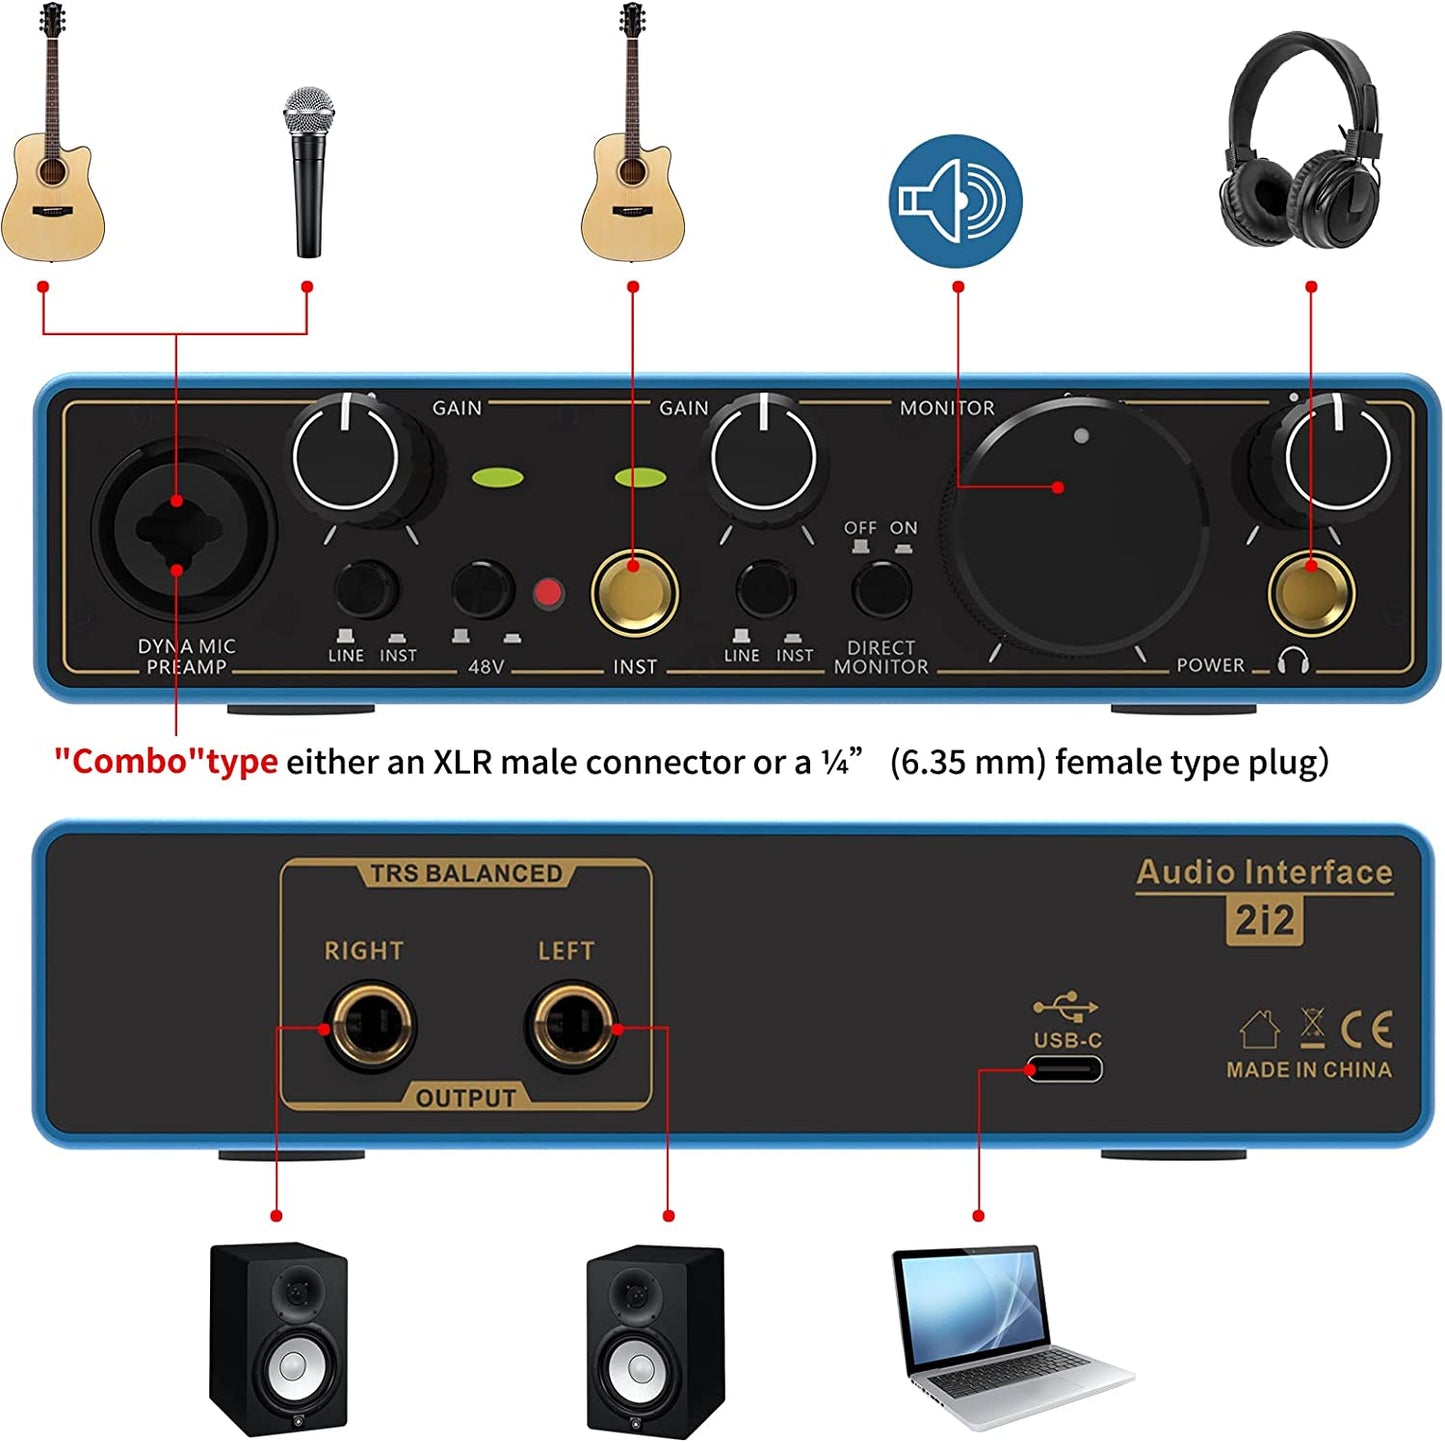 High-Fidelity USB Audio Interface with XRL Inputs, Ideal for Musicians, Podcasters, and Producers - Studio-Quality Recording with 24-Bit/192 kHz Resolution, Compatible with PC, Windows, and Mac